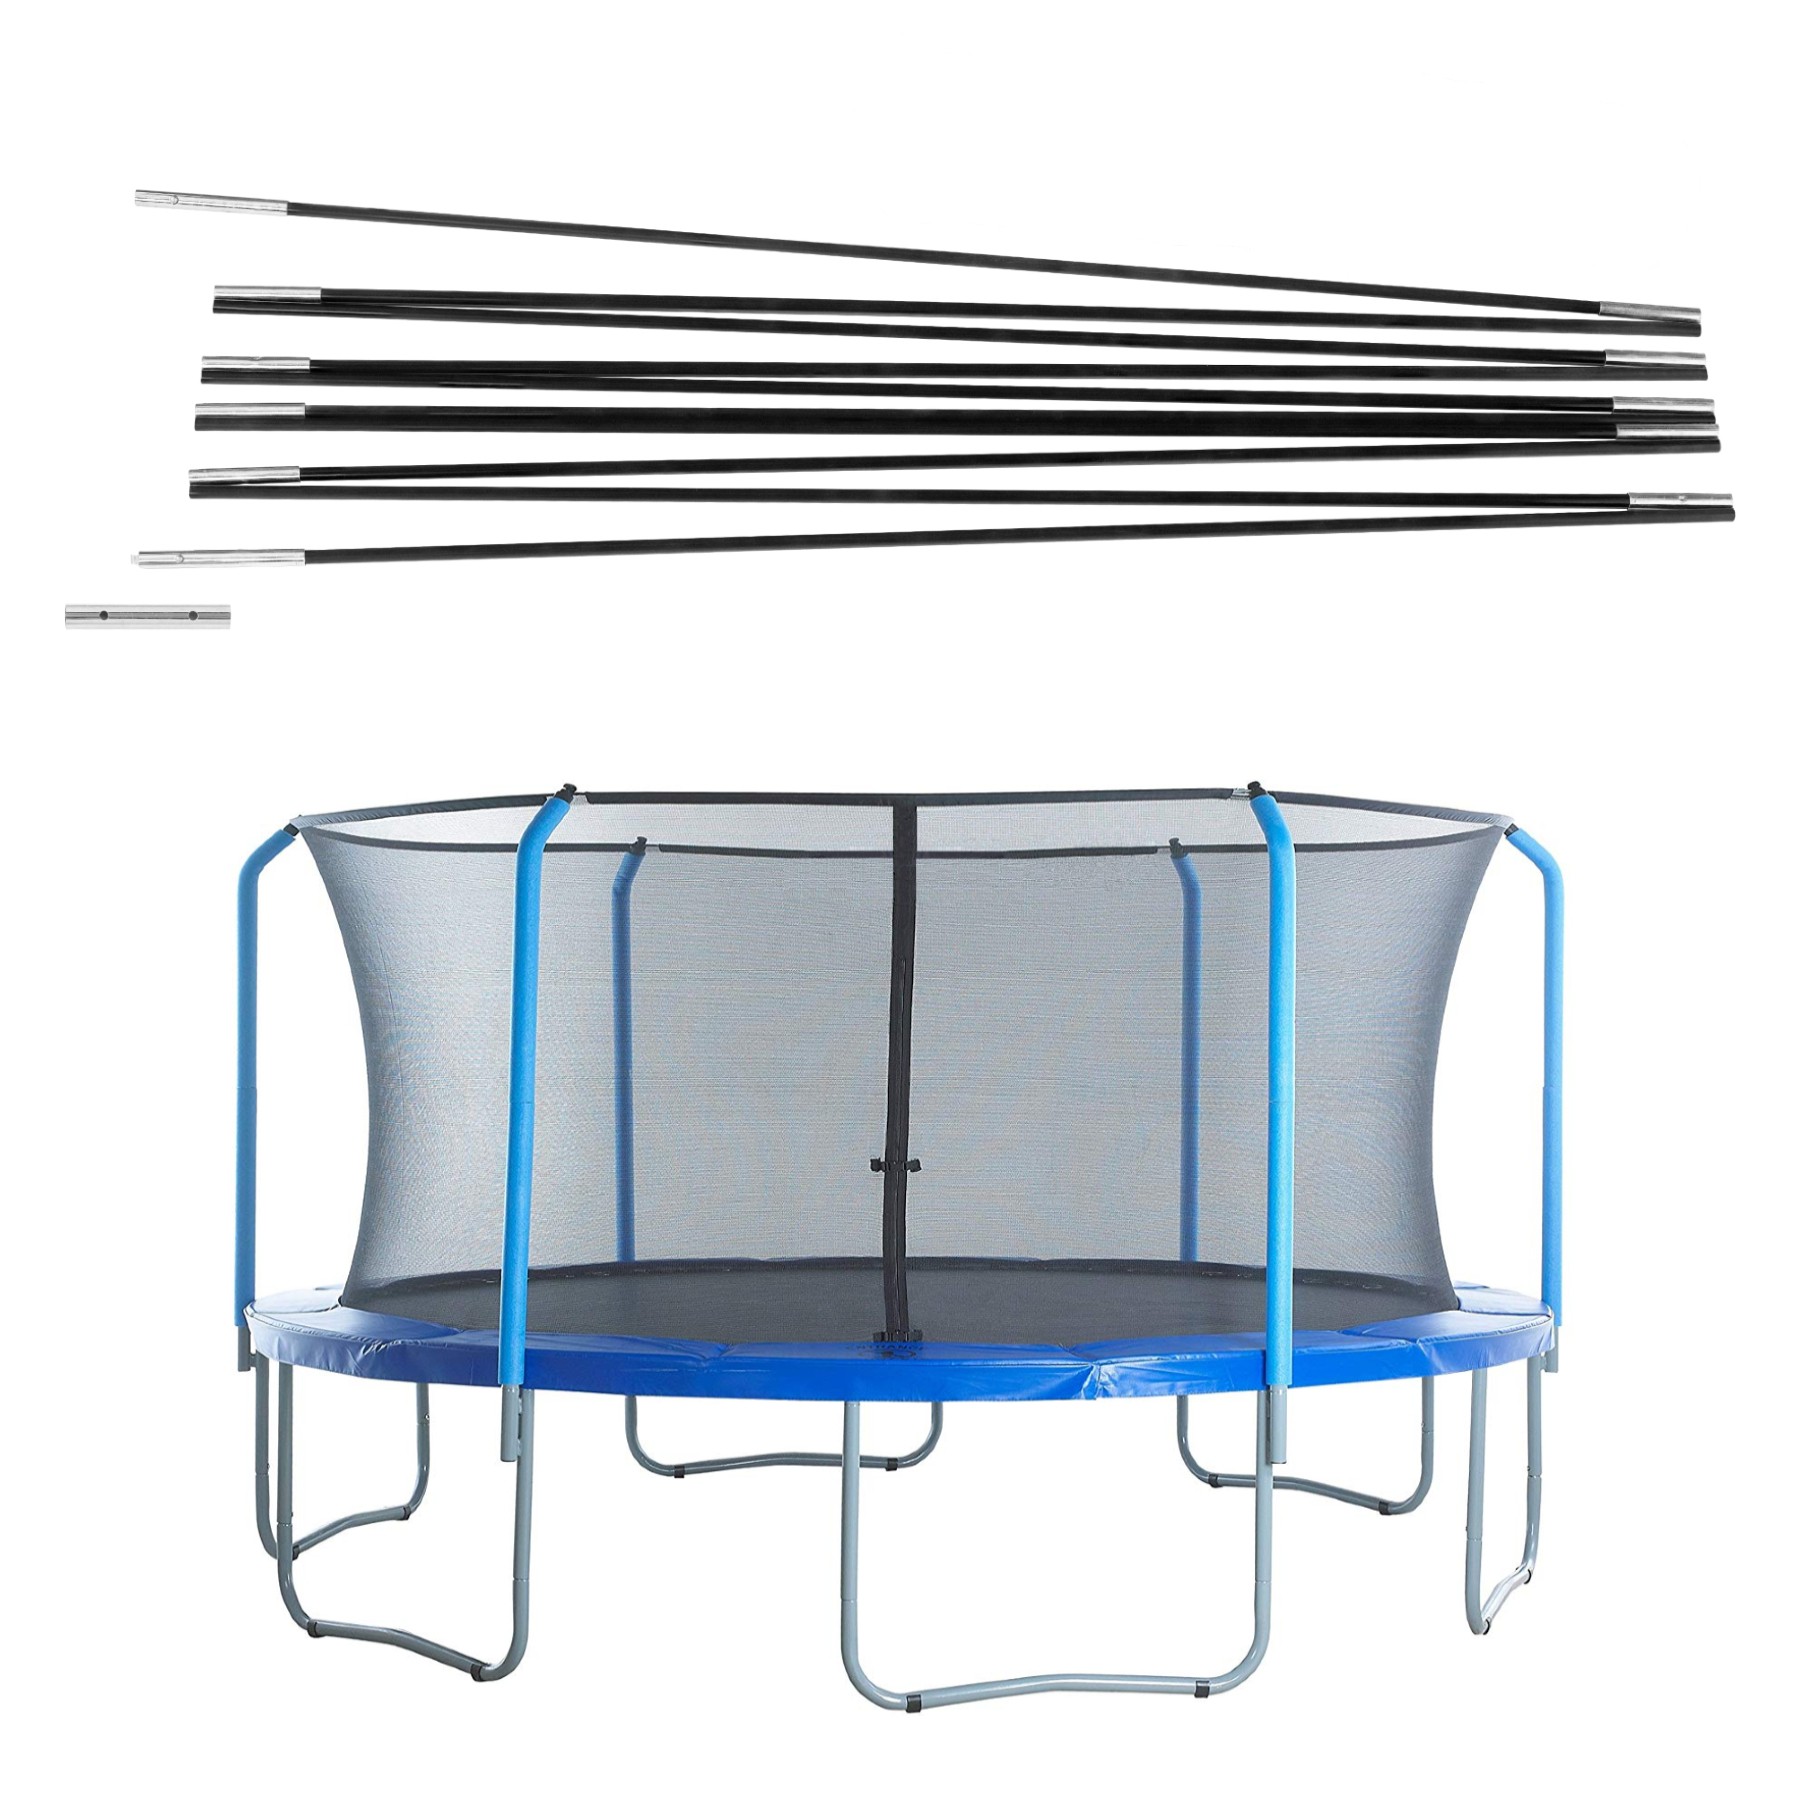 Universal Trampoline Fibreglass Rods to Replace the Top Ring of Net Enclosure for 12 FT. Frame - Pole Caps Included